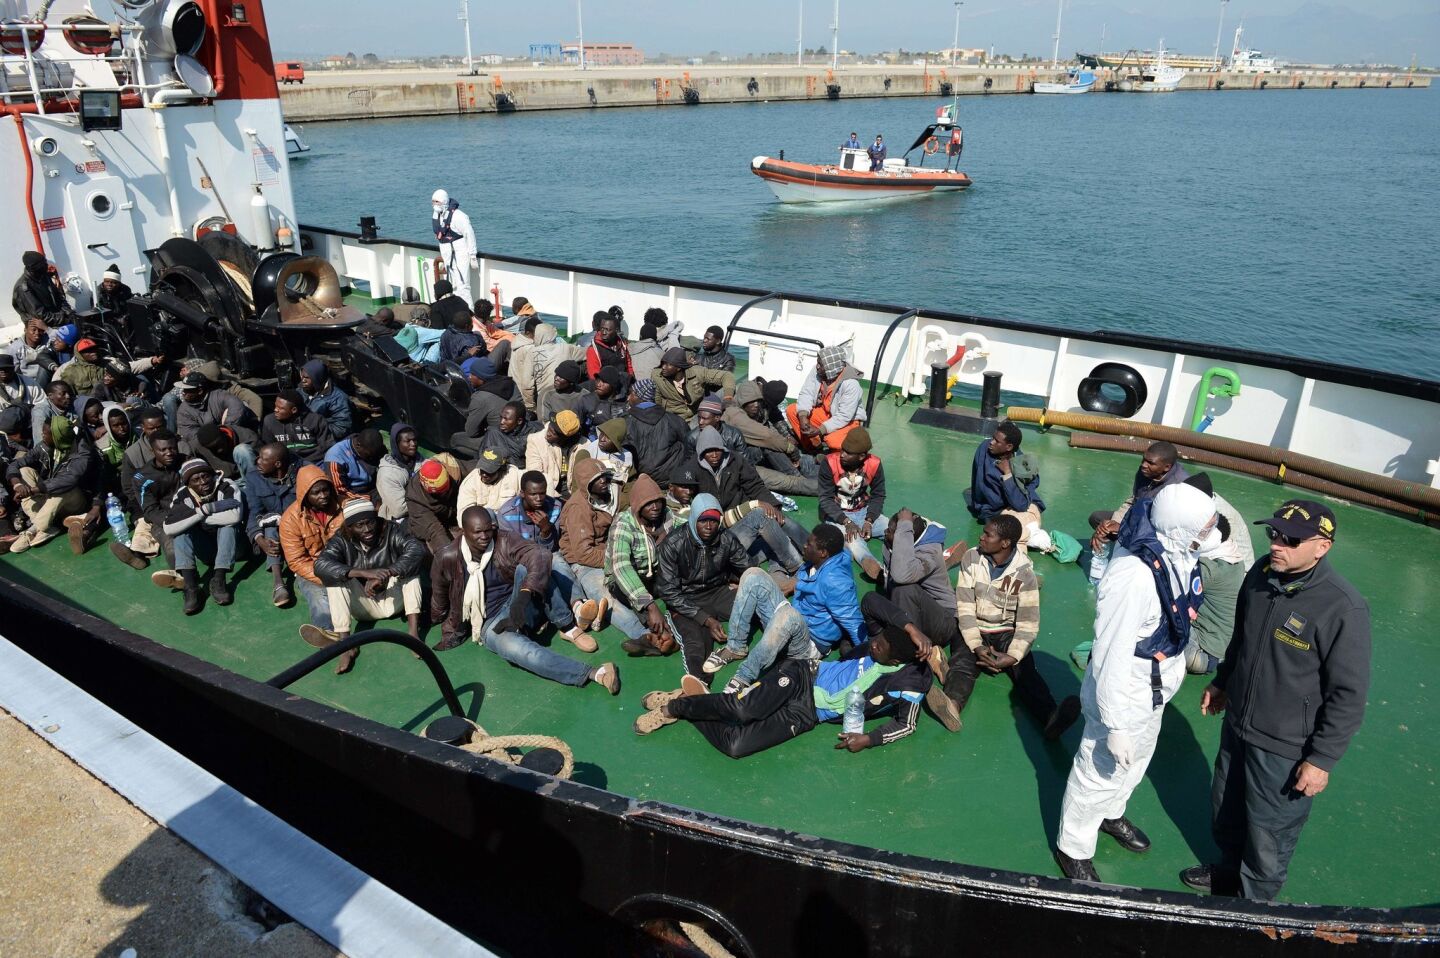 Survivors from the shipwreck of a boat arrive aboard the tanker Maria Bottiglieri on Wednesday in the port of Corigliano Calabro. The Italian coast guard intercepted 42 boats on April 12 and 13, carrying 6,500 migrants attempting to make the hazardous crossing to Europe.